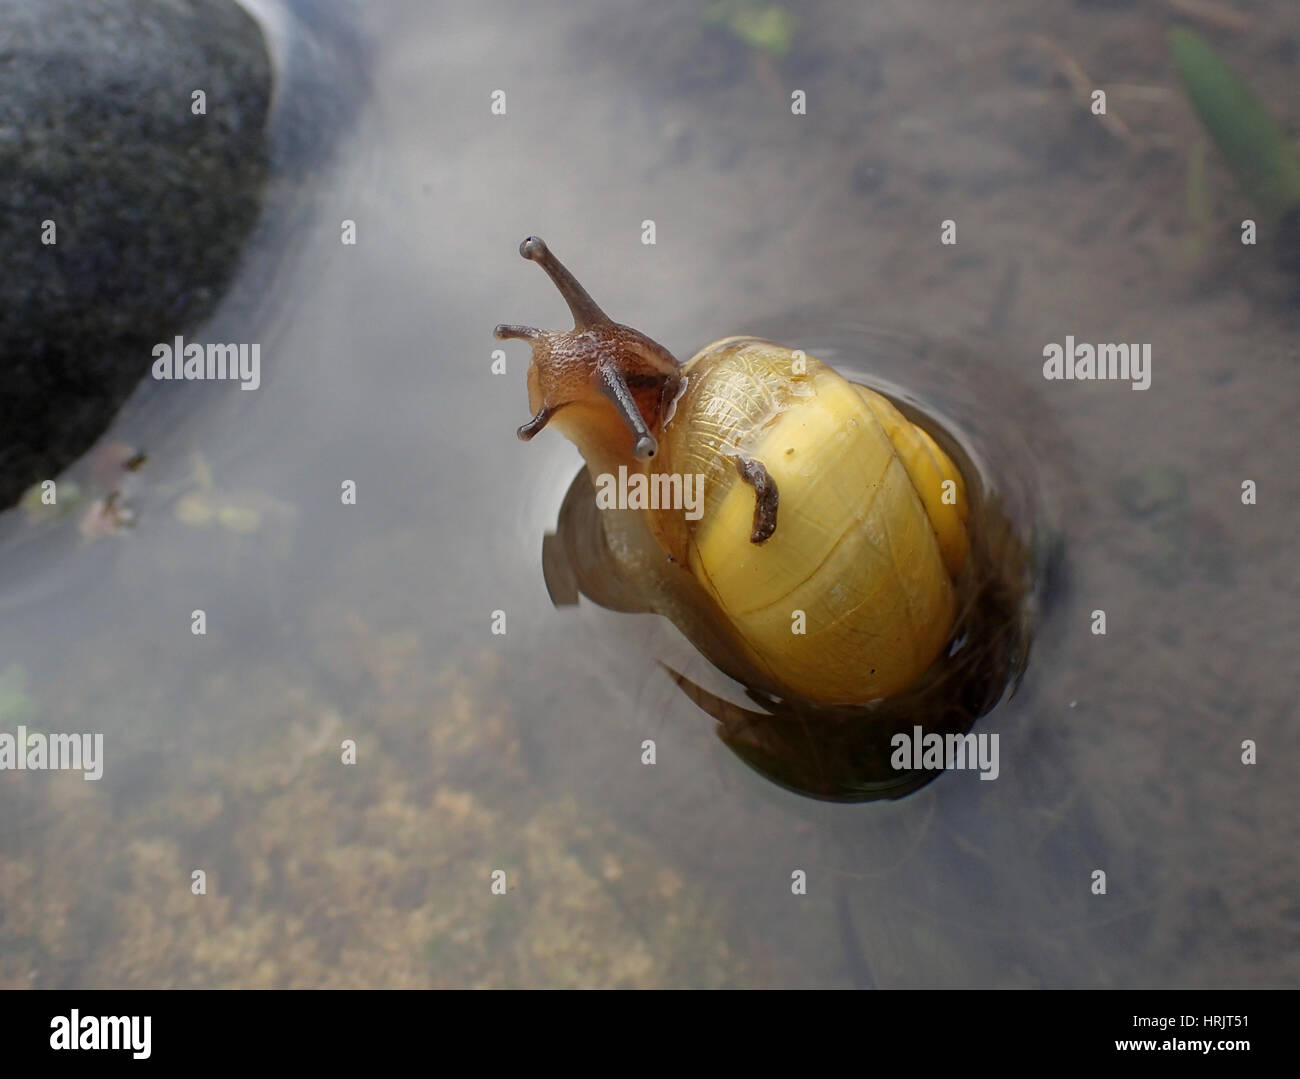 A yellow-shelled white-lipped snail (Cepaea hortensis) in shallow water at the edge of a garden pond looking at the photographer Stock Photo